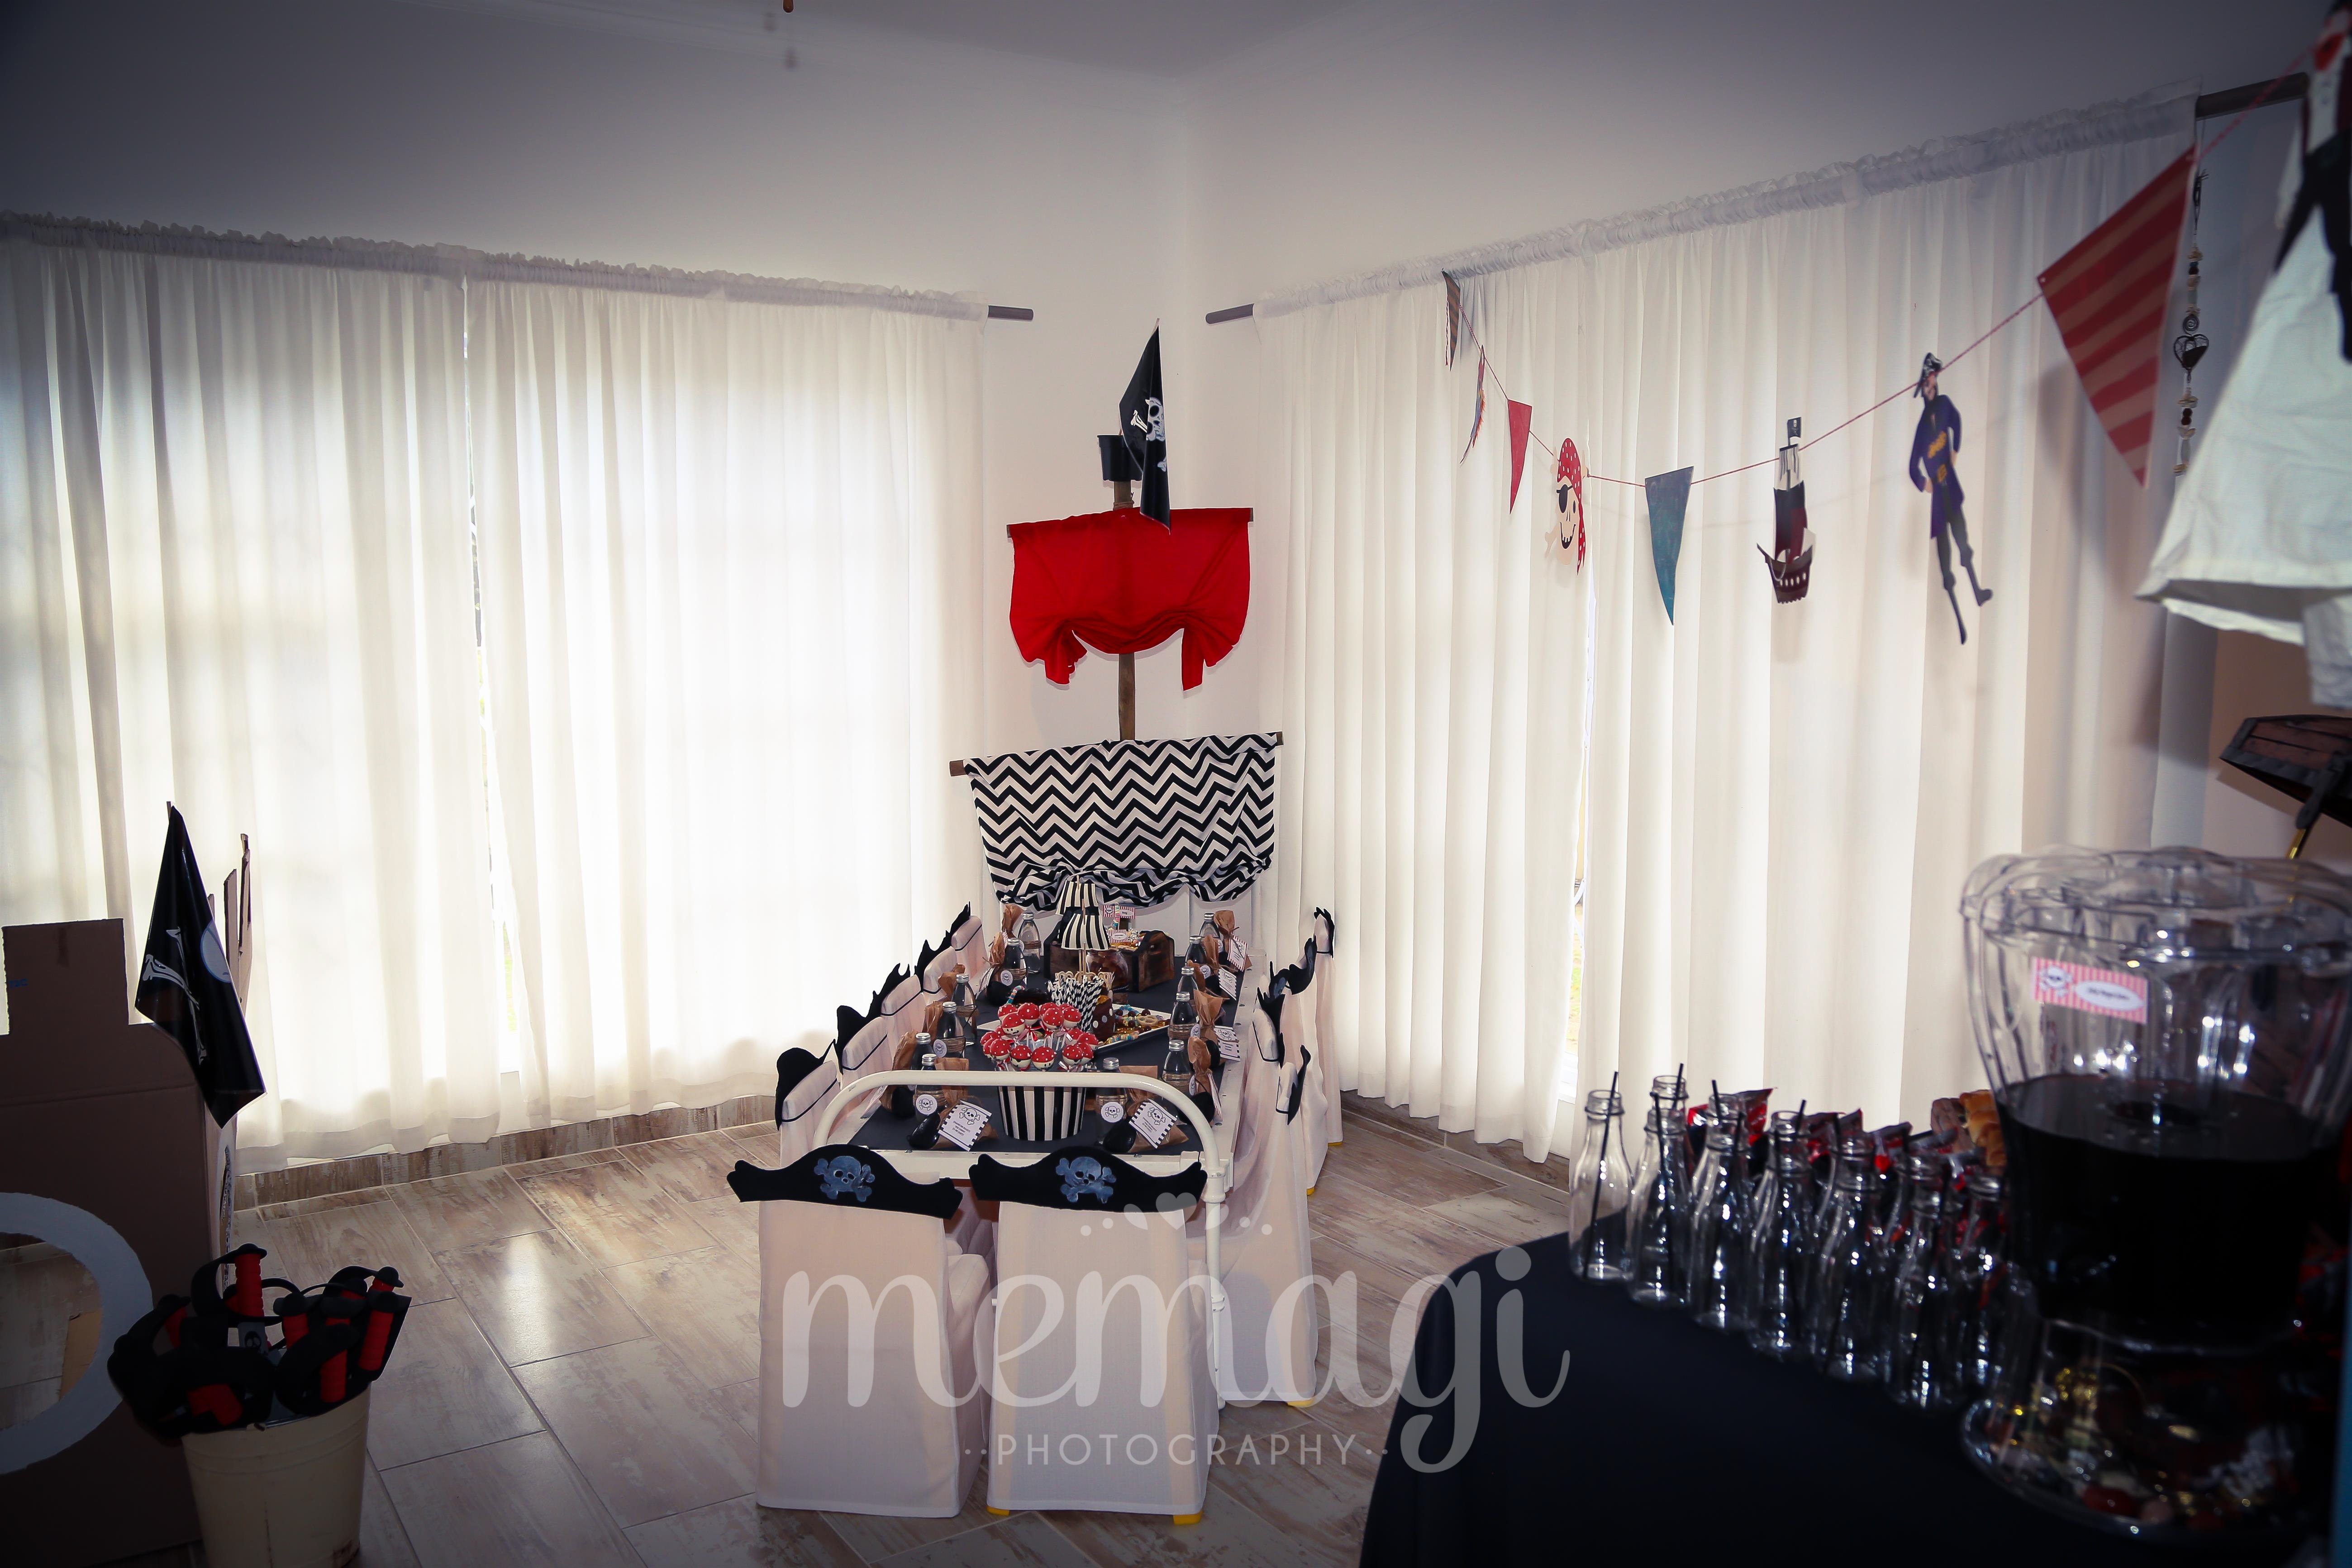 Pirate kids party ideas | Memagi Photography Cape Town | Things to do with kids